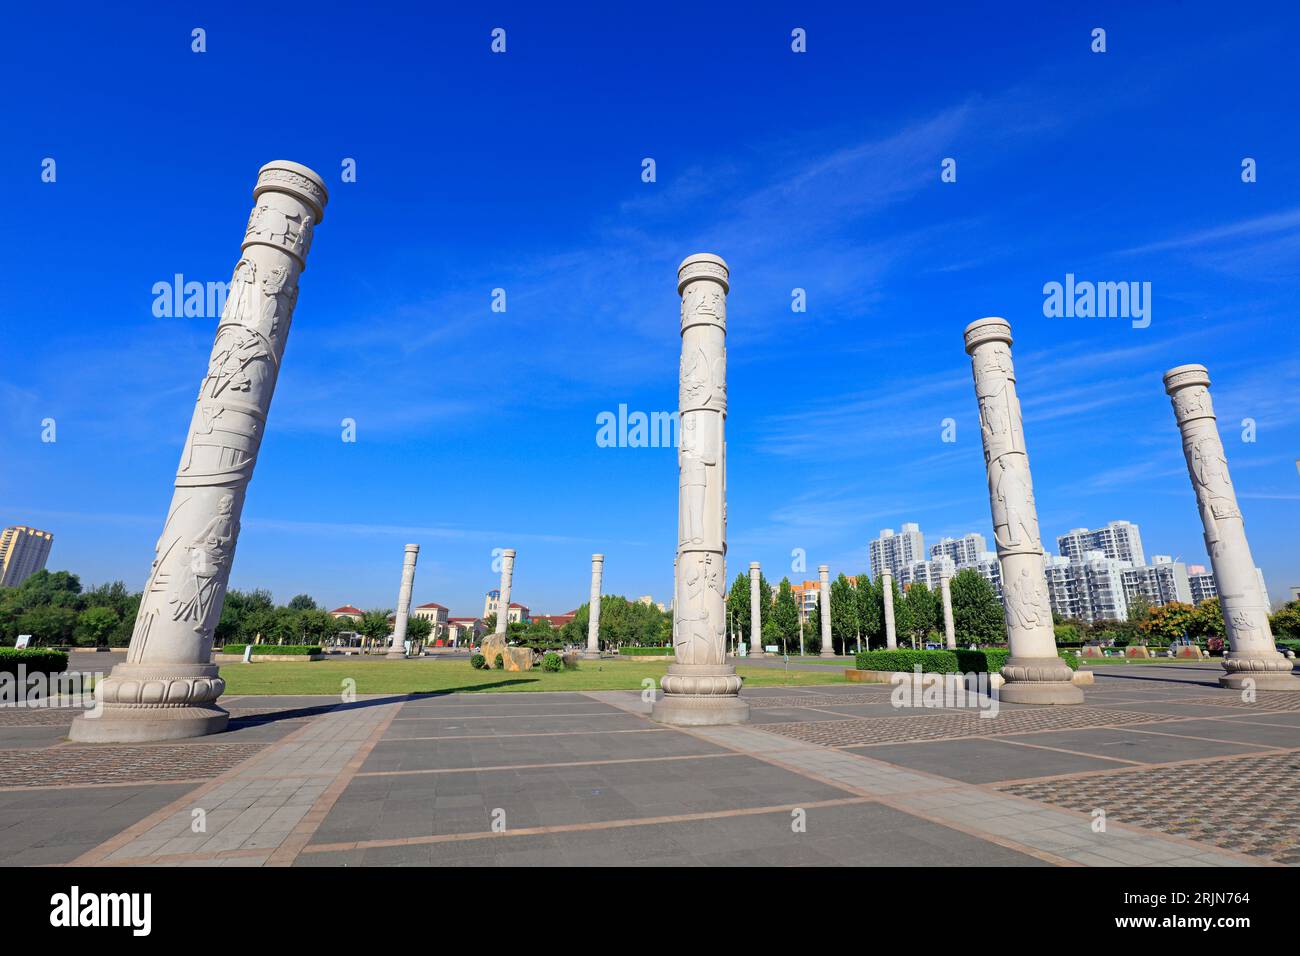 Luannan County - September 17, 2018: Building Scenery of Huimin Square, Luannan County, Hebei Province, China Stock Photo